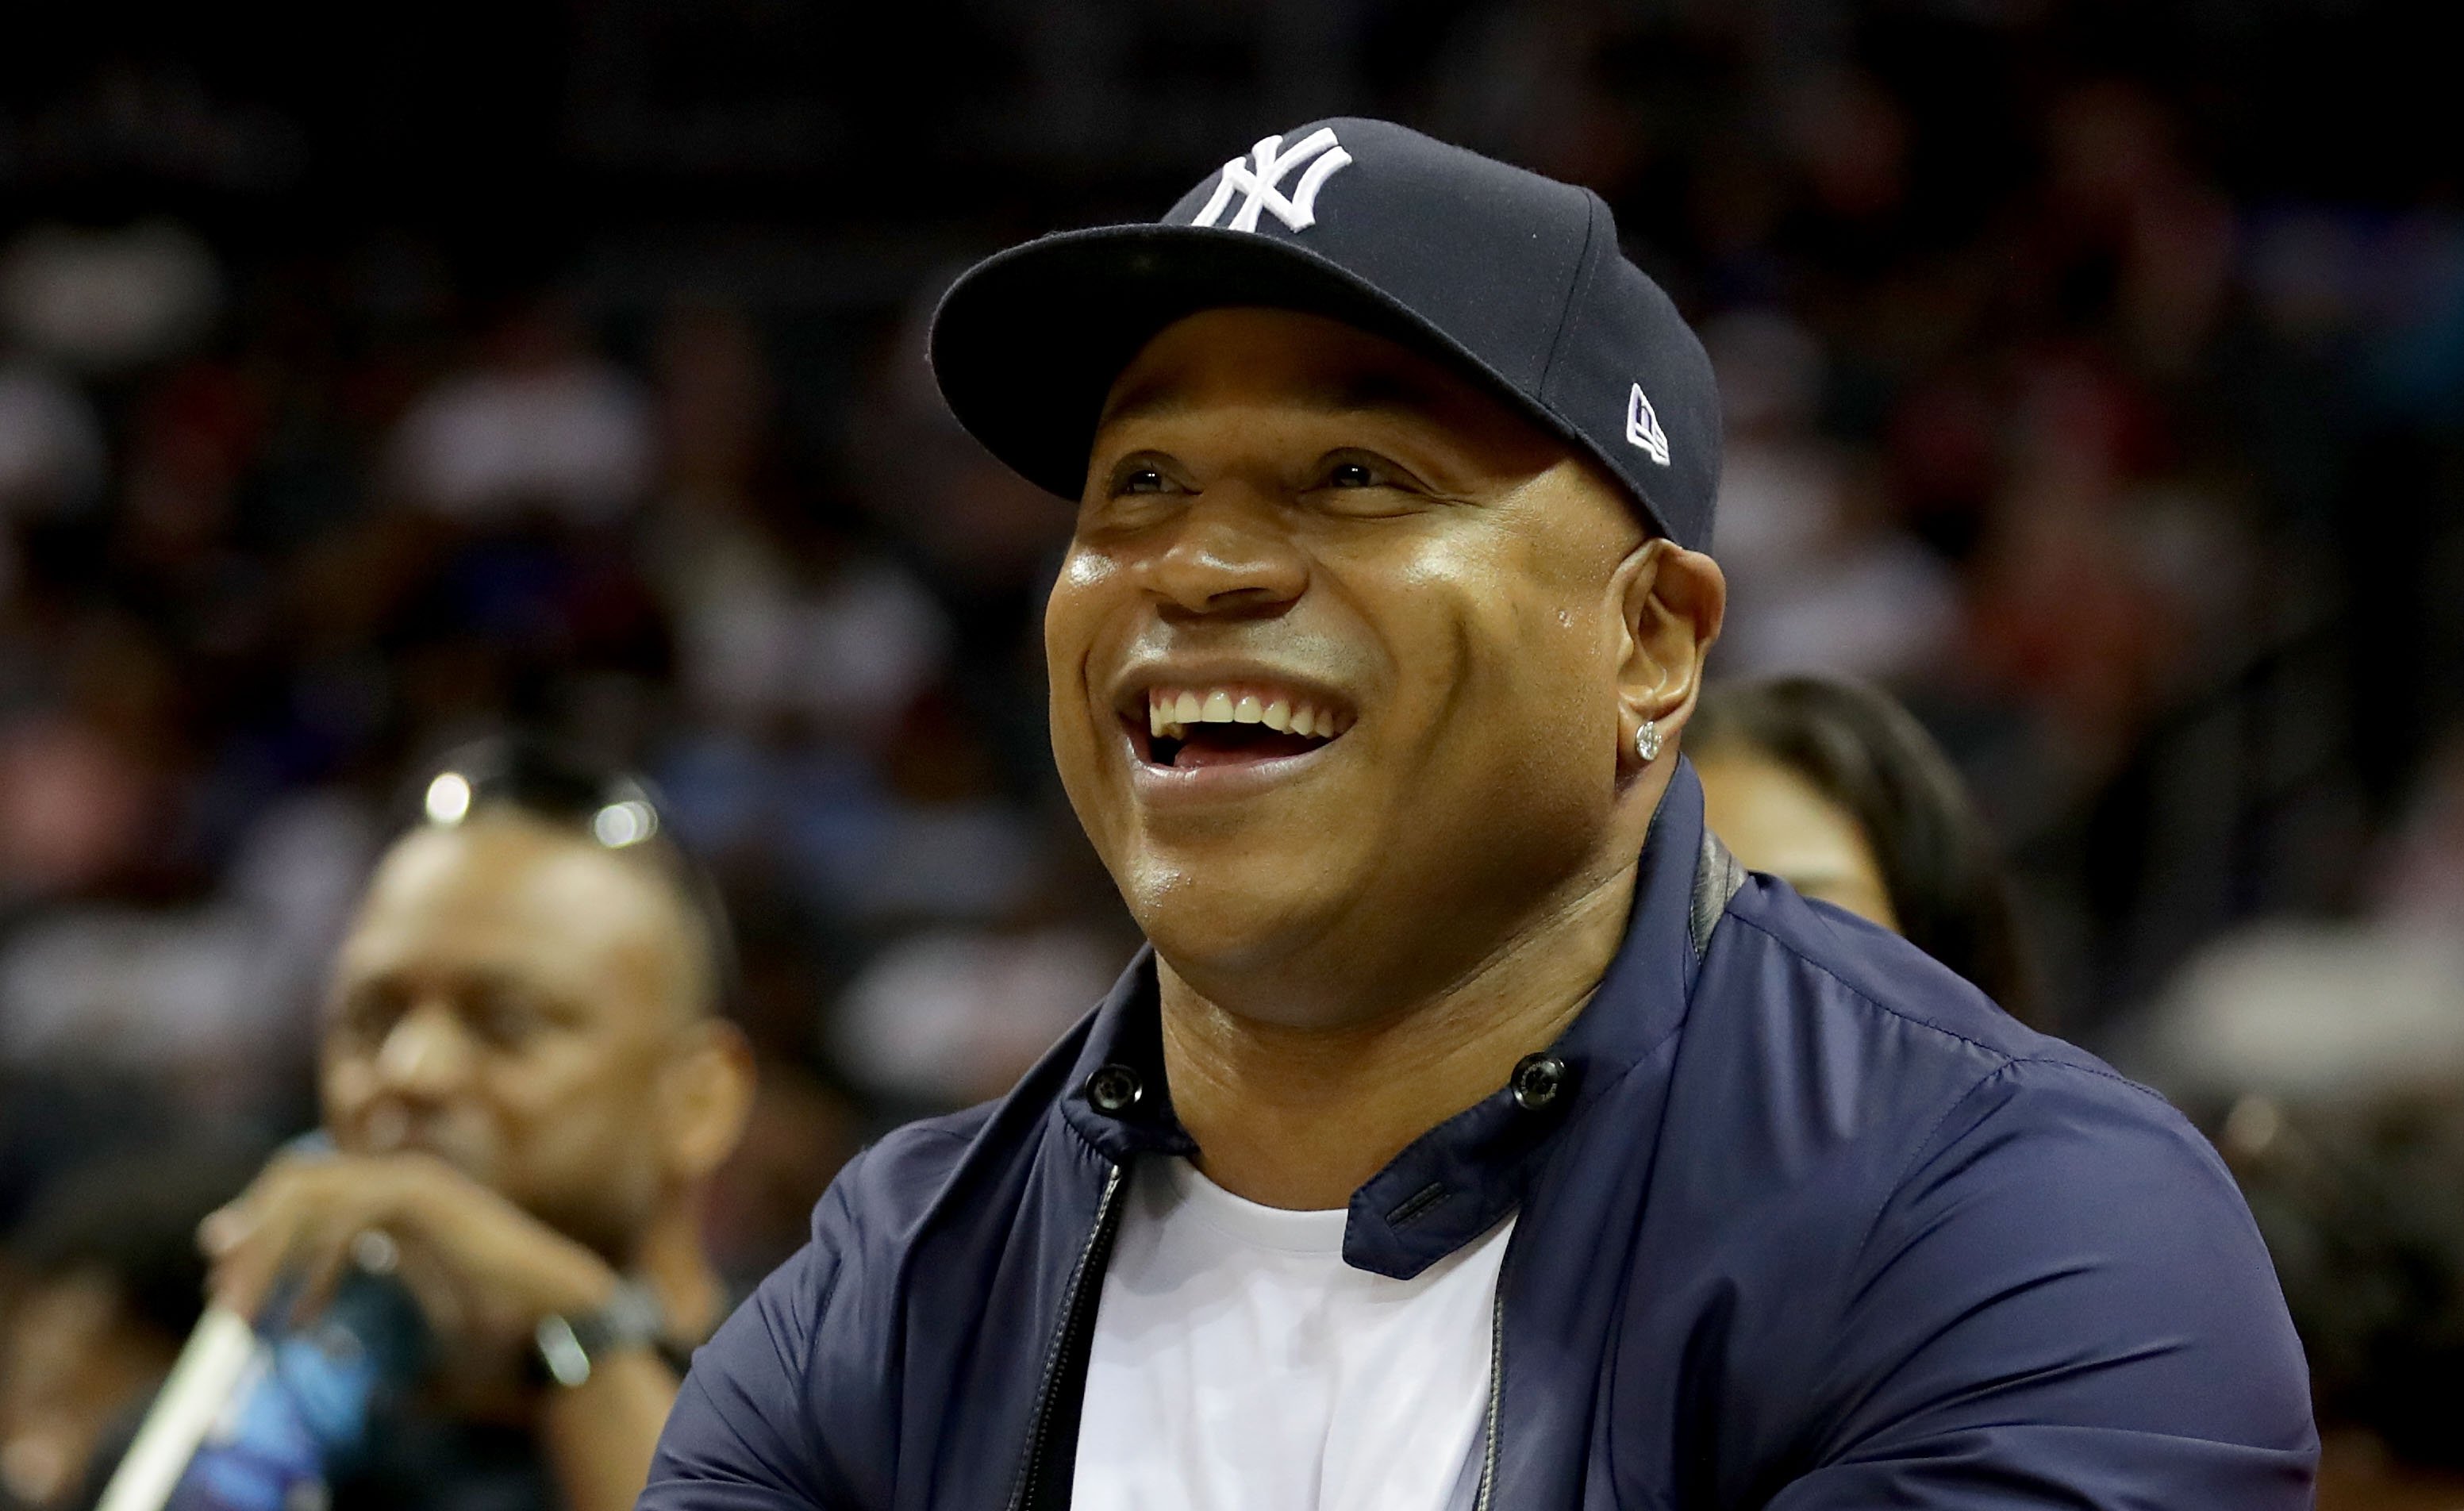 LL Cool J looks on during week two of the BIG3 three on three basketball league at Spectrum Center on July 2, 2017. | Photo: Getty Images